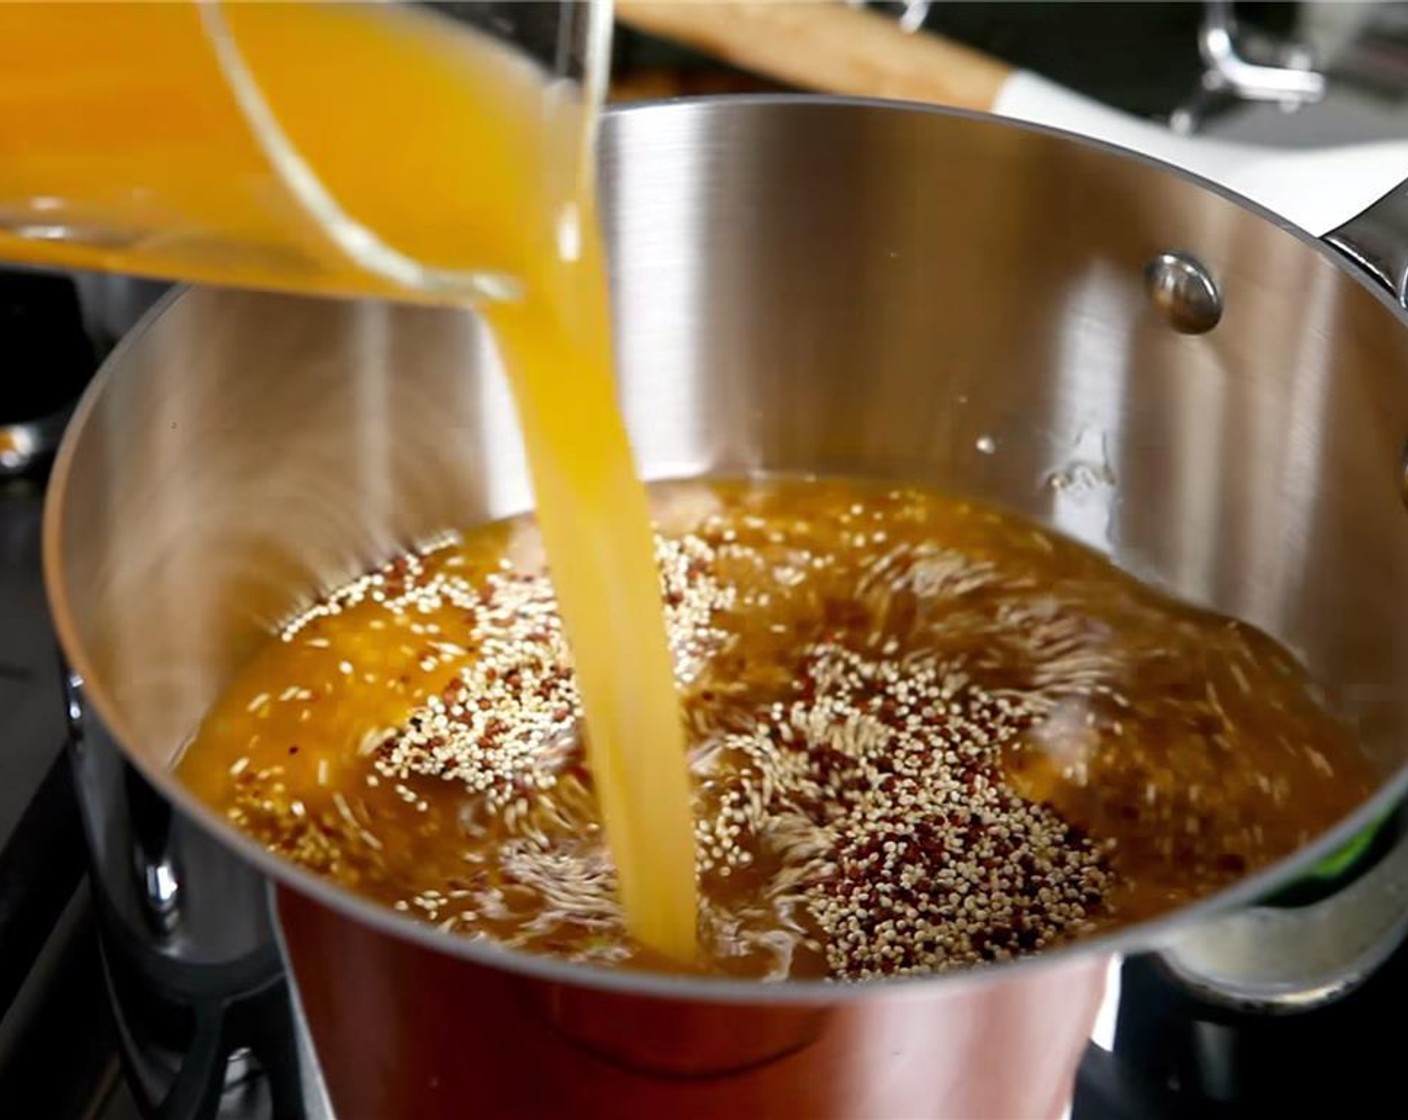 step 2 Heat the Quinoa (3/4 cup) and Swanson® Mexican Tortilla Flavor Infused Broth (1 3/4 cups) in a 2-quart saucepan over medium-high heat to a boil. Reduce the heat to low. Cover and cook for 15 minutes or until quinoa is tender.